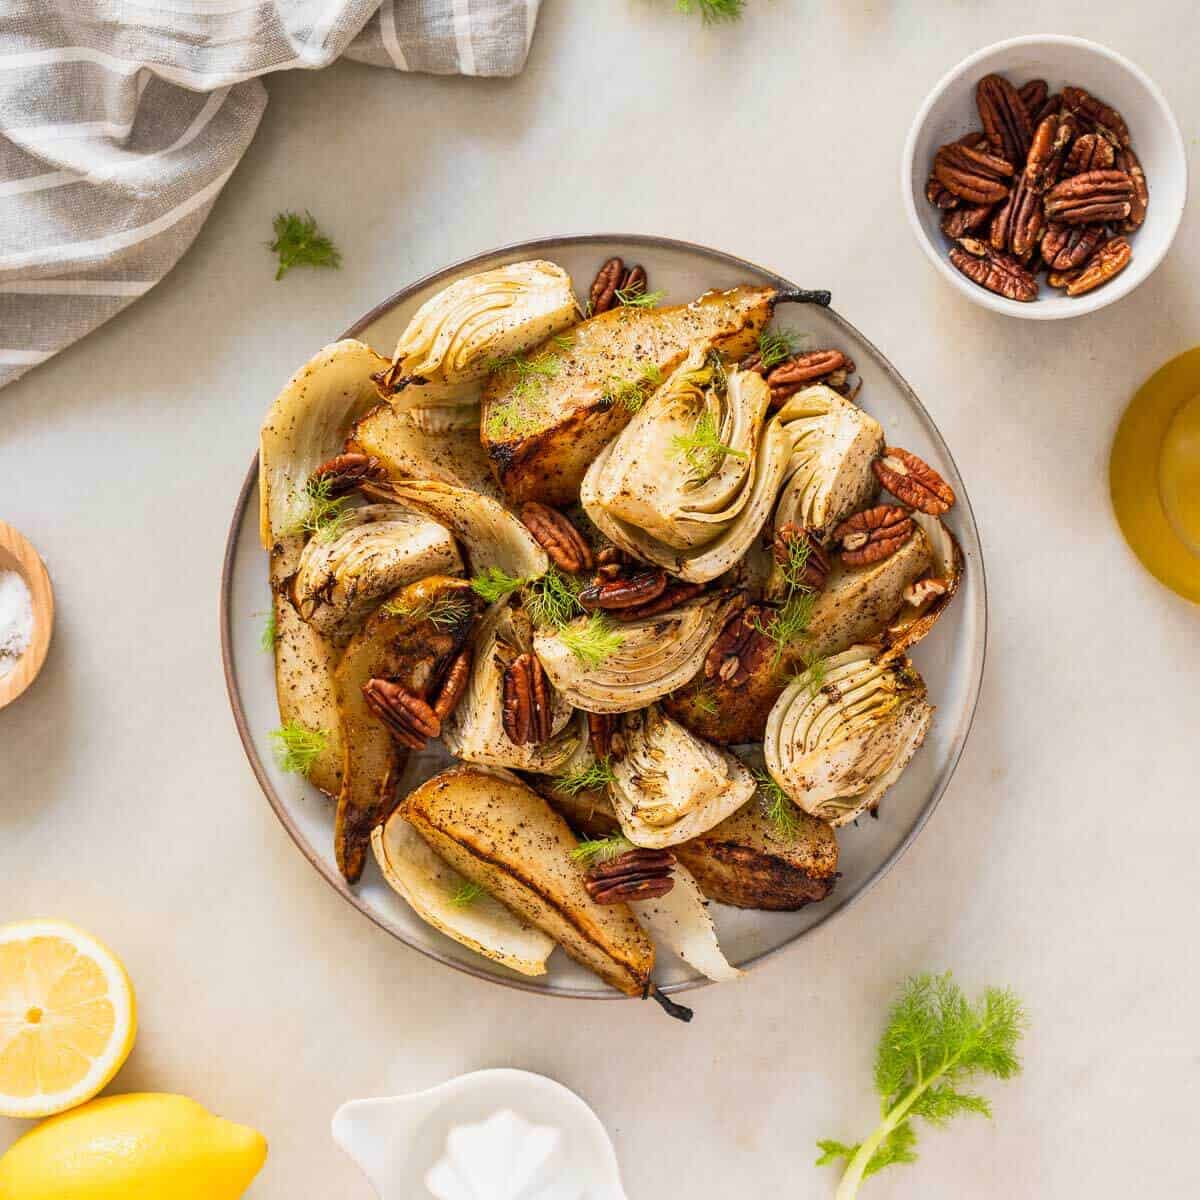 Roasted Fennel and Pear Salad with Vinaigrette and Pecan Nuts